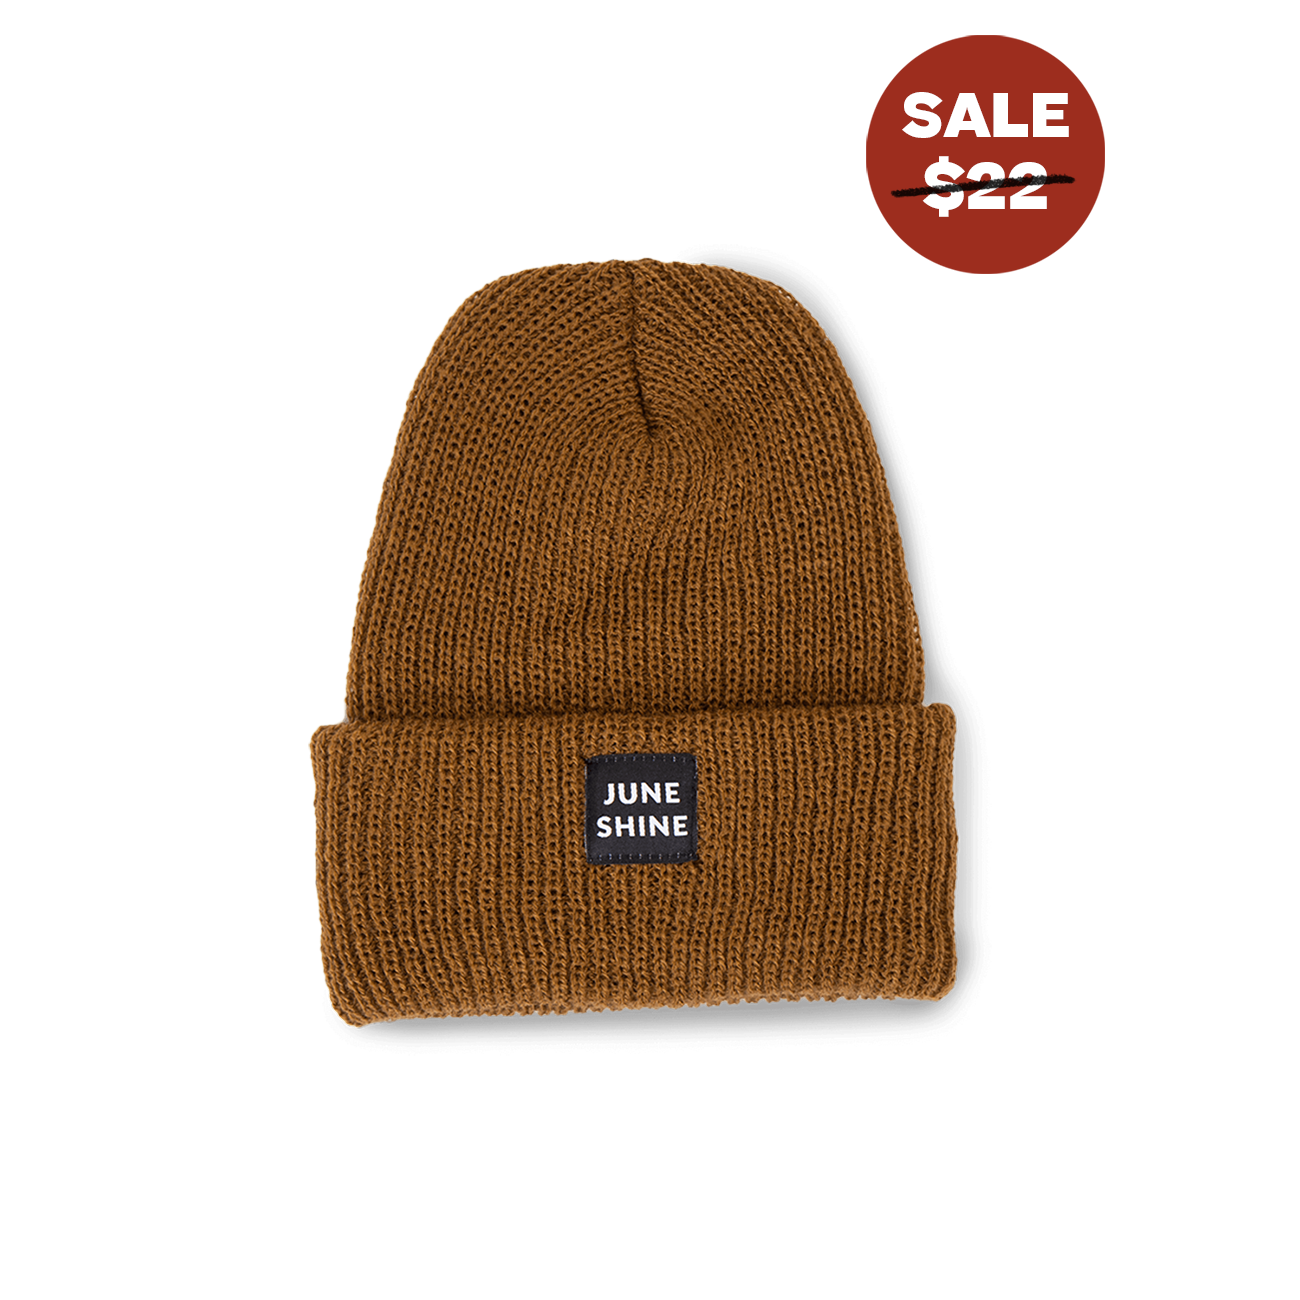 Light brown knit beanie with JuneShine logo patch